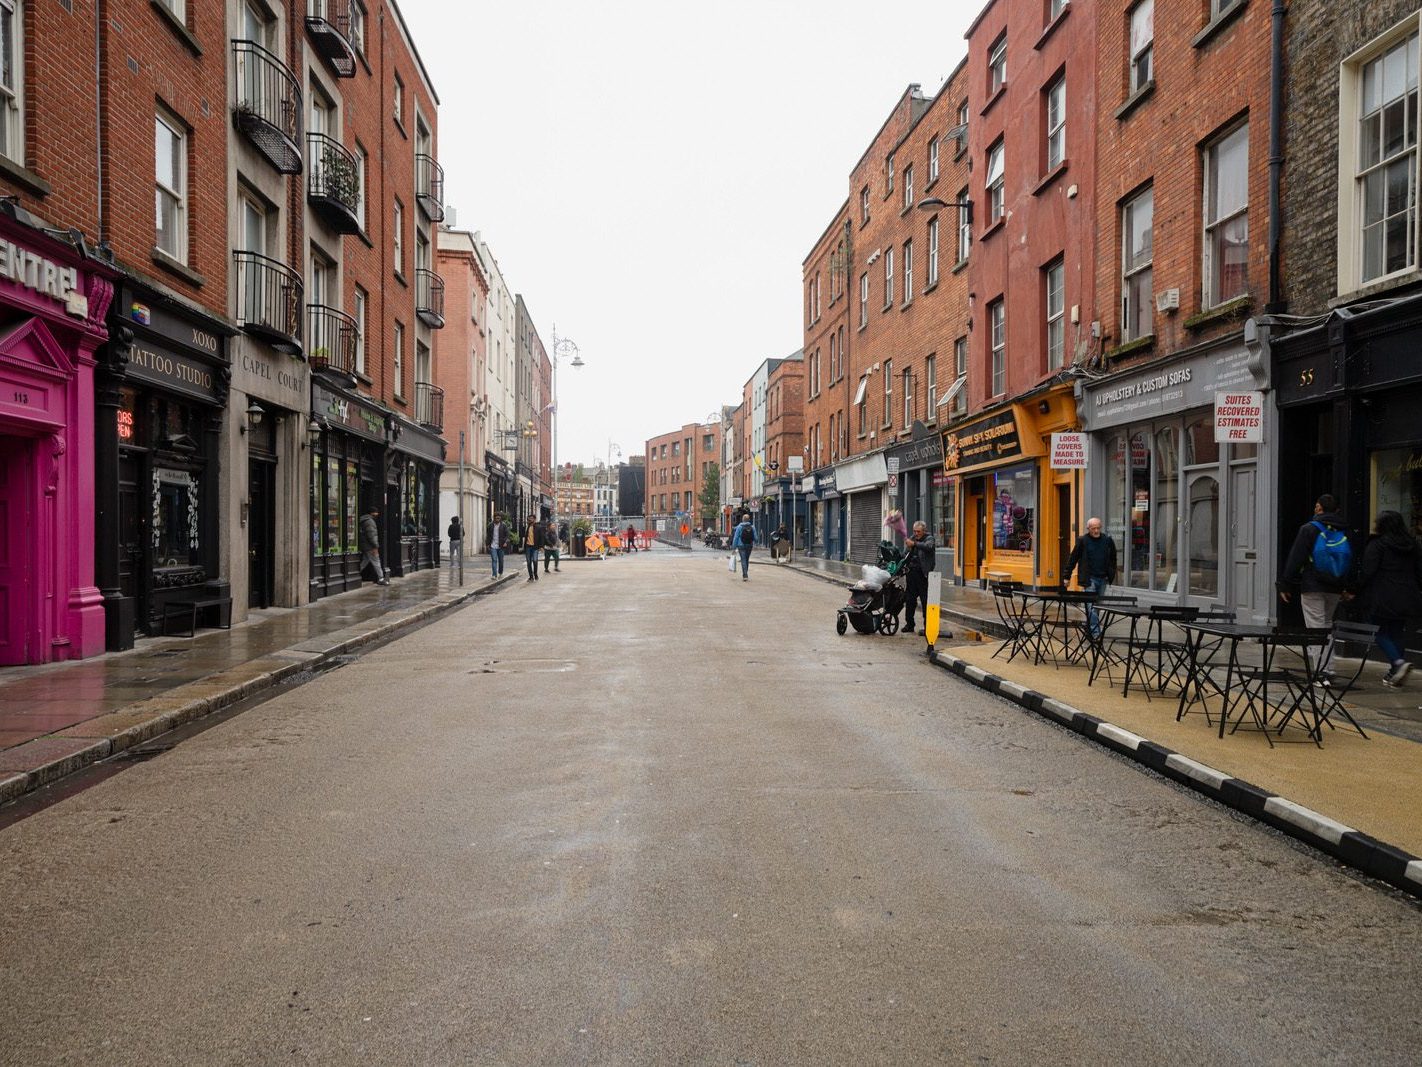 CAPEL STREET ON A DULL WET DAY [INTERIM CAPEL STREET IMPROVEMENT WORKS ARE NOW ONGOING] 029